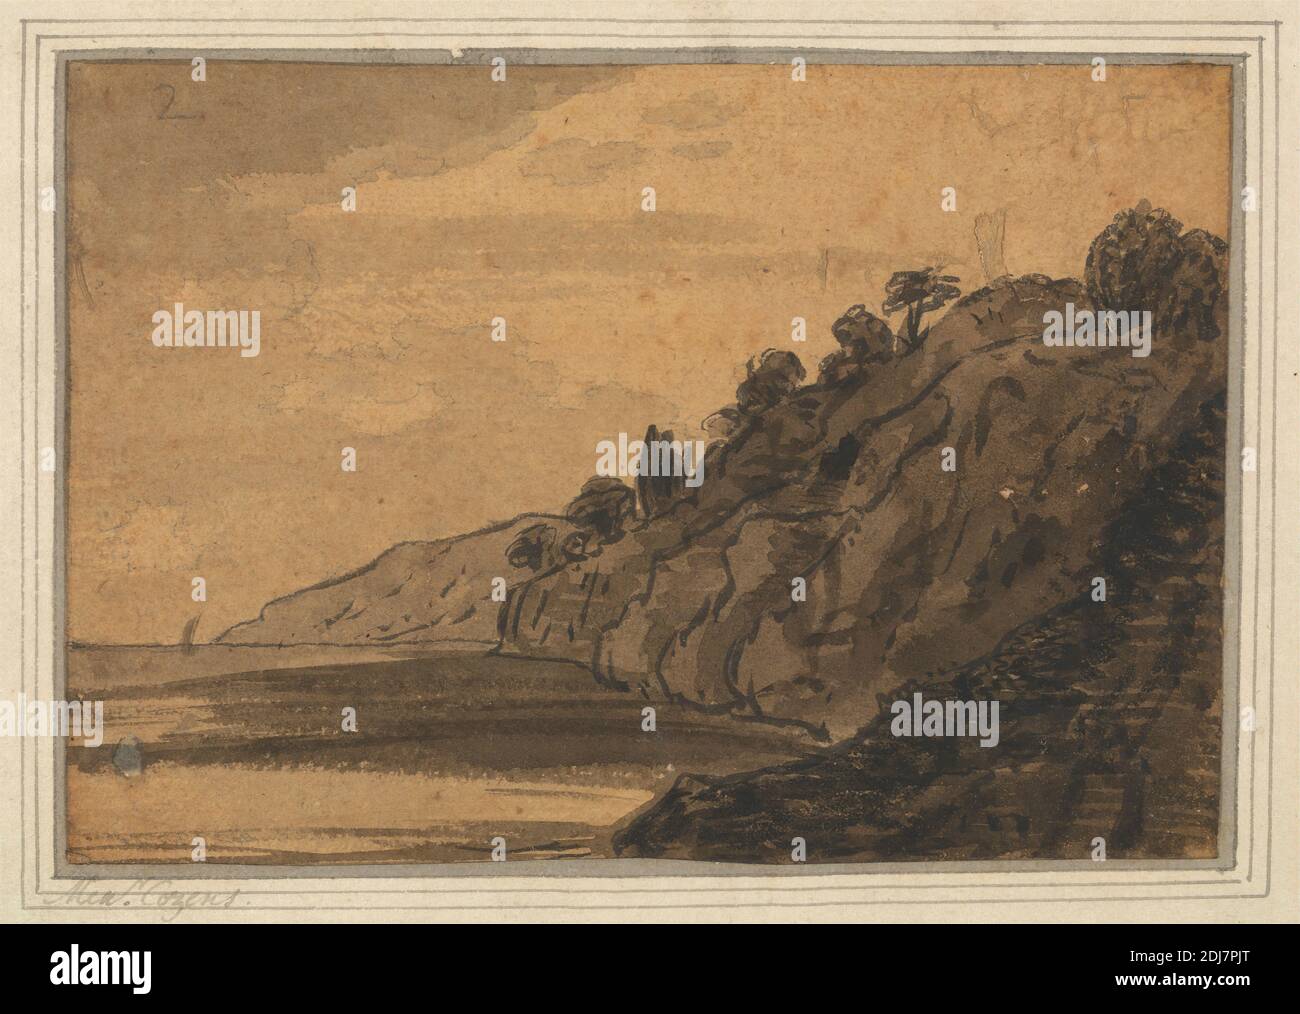 Coastal Scene with Wooded Cliff, Alexander Cozens, 1717–1786, British, ca. 1770, Black ink, graphite, brown wash, gray wash, brown ground and varnish on medium, slightly textured, cream laid paper, mounted on thick, moderately textured, beige laid paper, Mount: 9 7/8 x 13 5/8 inches (25.1 x 34.6 cm) and Sheet: 4 7/8 x 7 inches (12.4 x 17.8 cm), cliffs, clouds, landscape, sailboats, seascape, shore (landform), trees Stock Photo